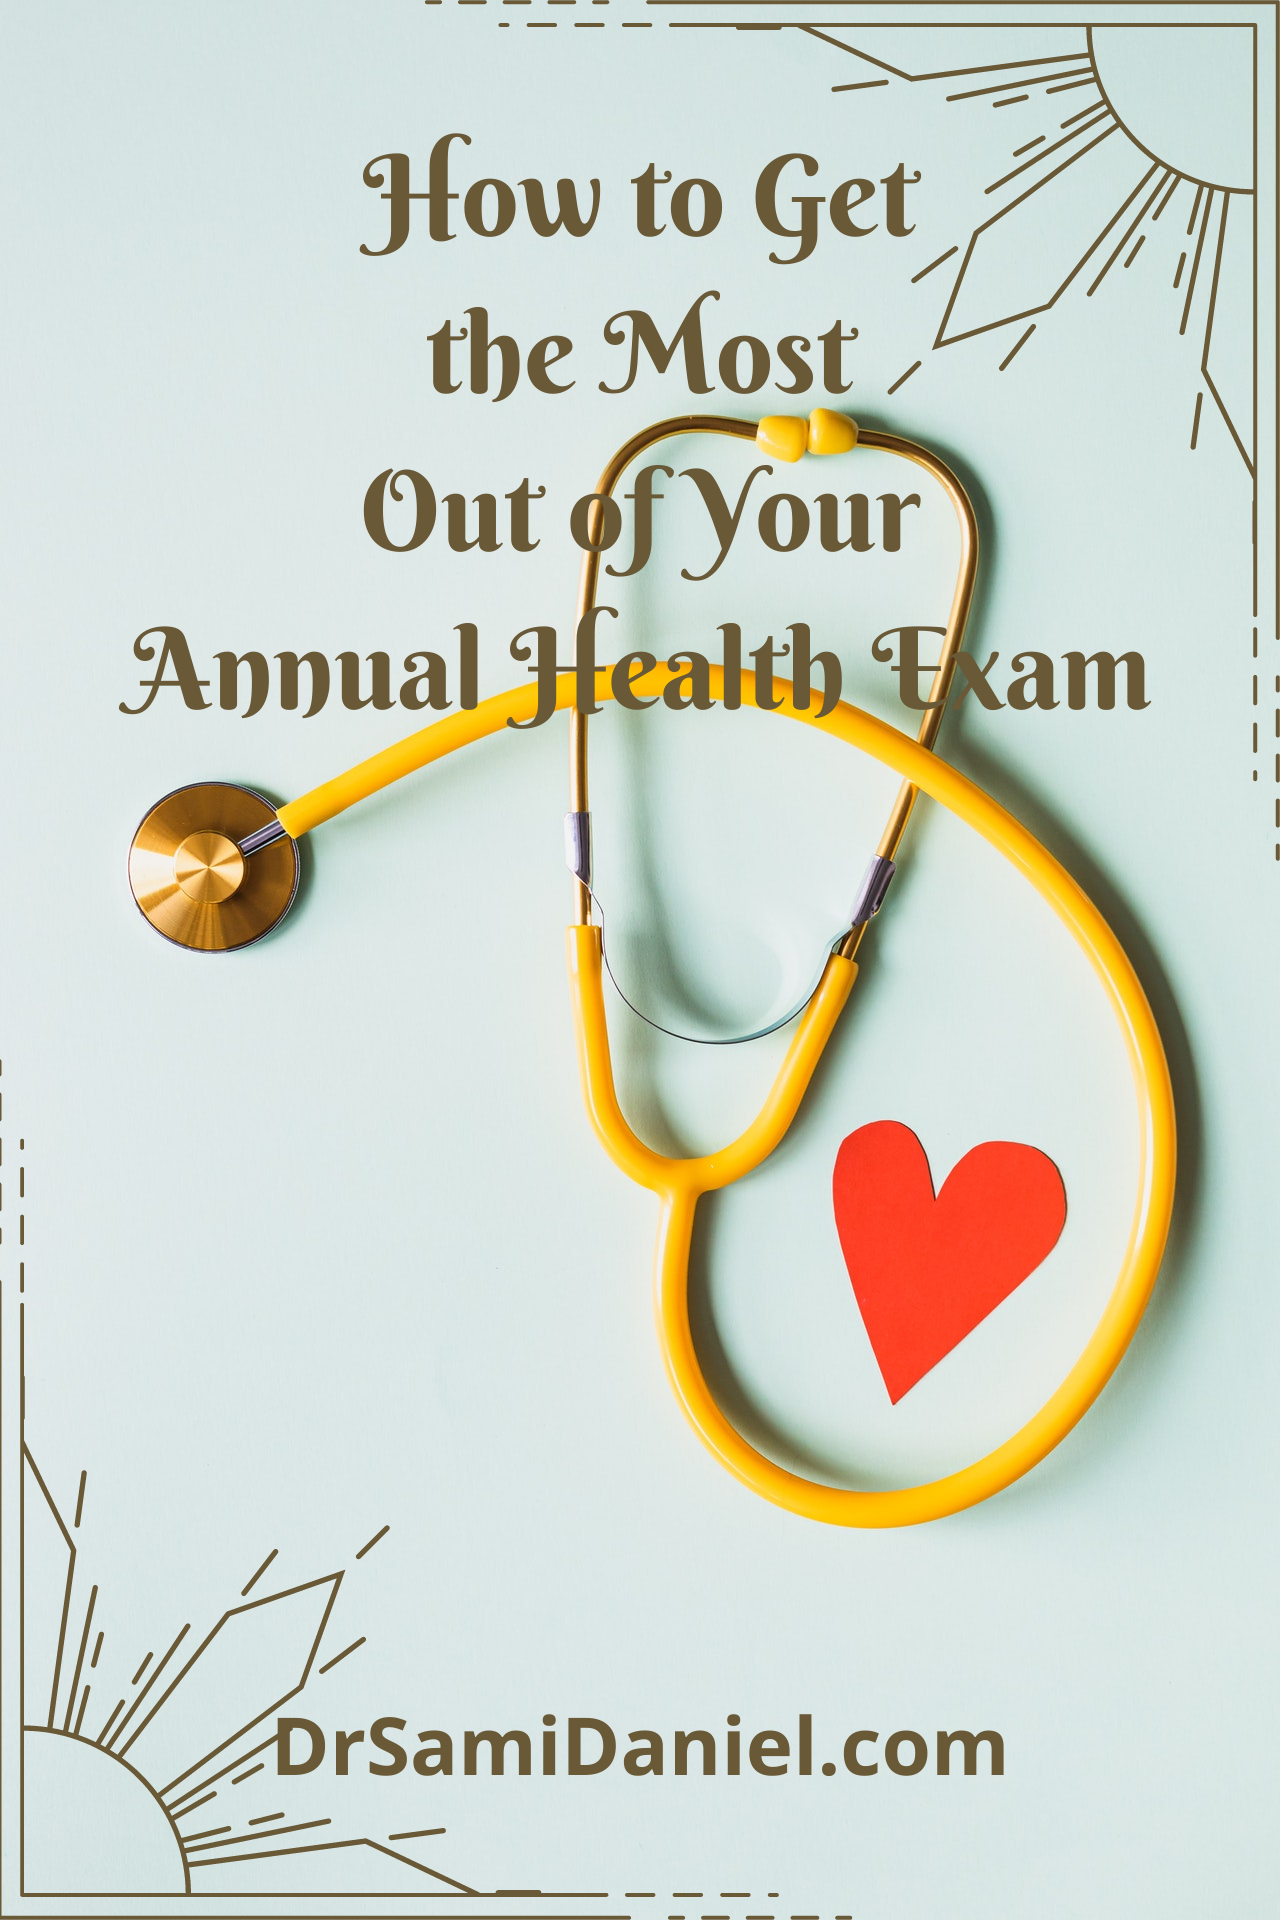 How to get the most out of your annual health exam